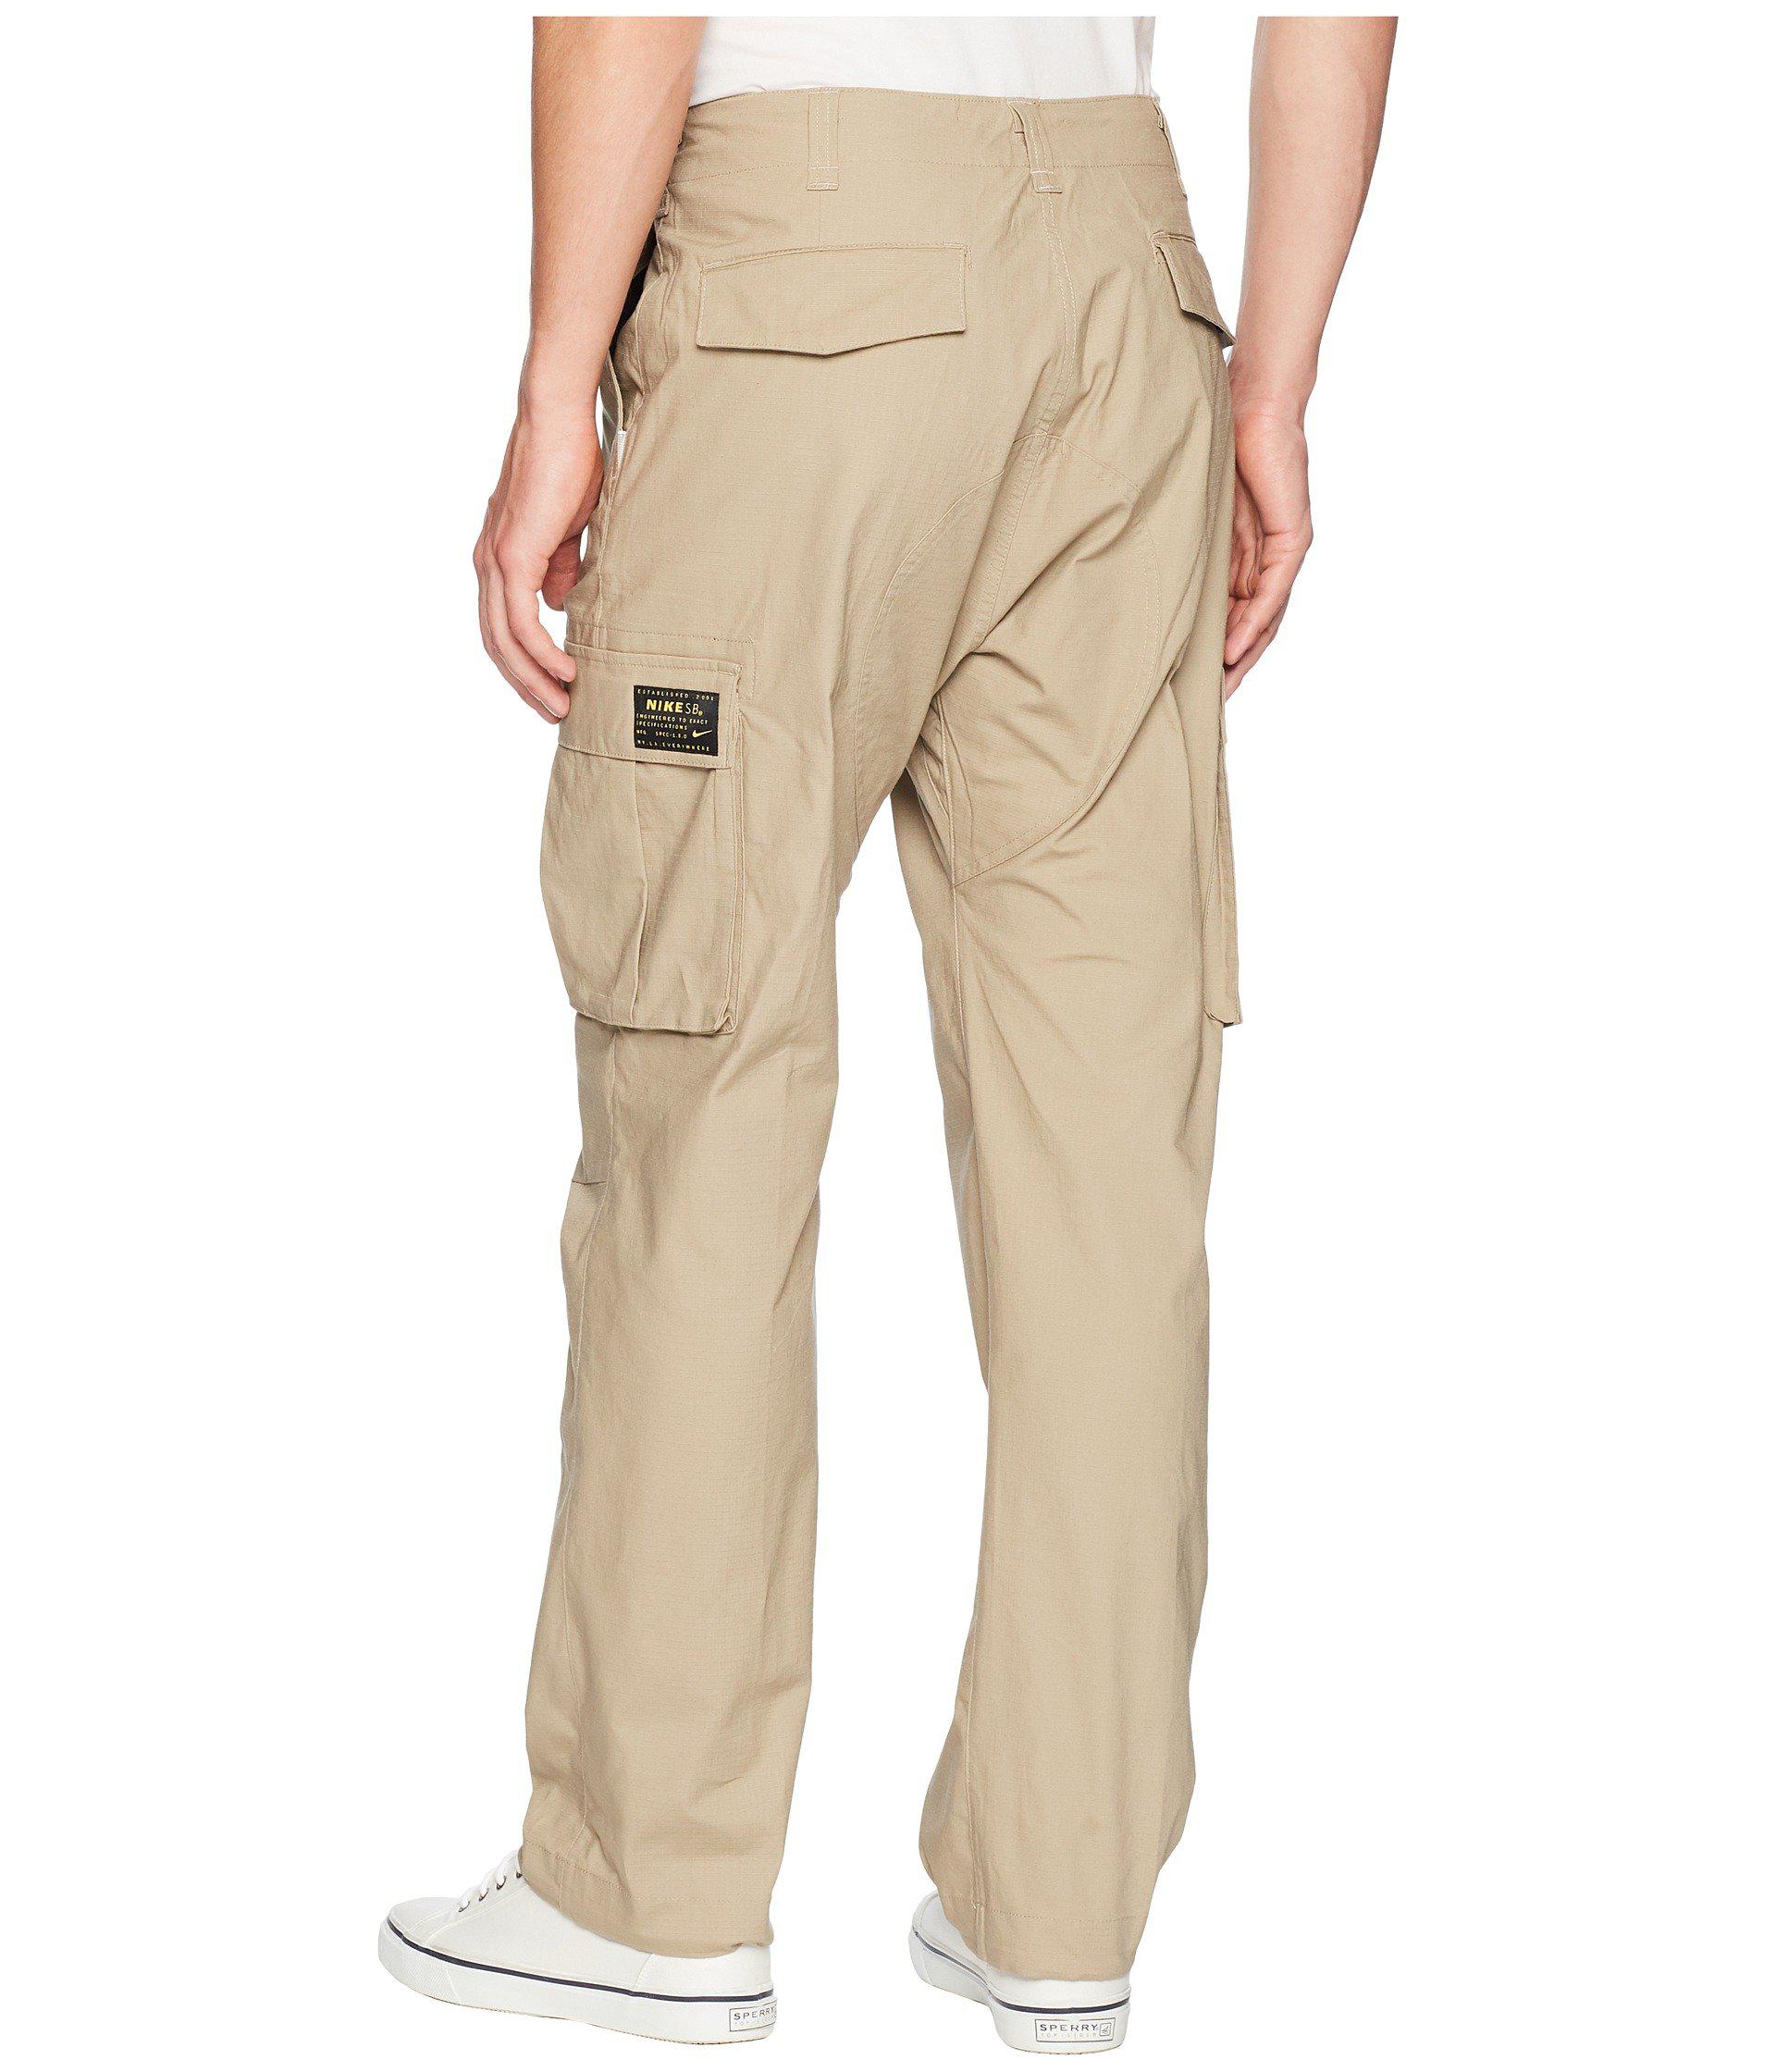 Nike Cotton Sb Flex Pants Fit To Move Cargo in Khaki (Natural) for ...